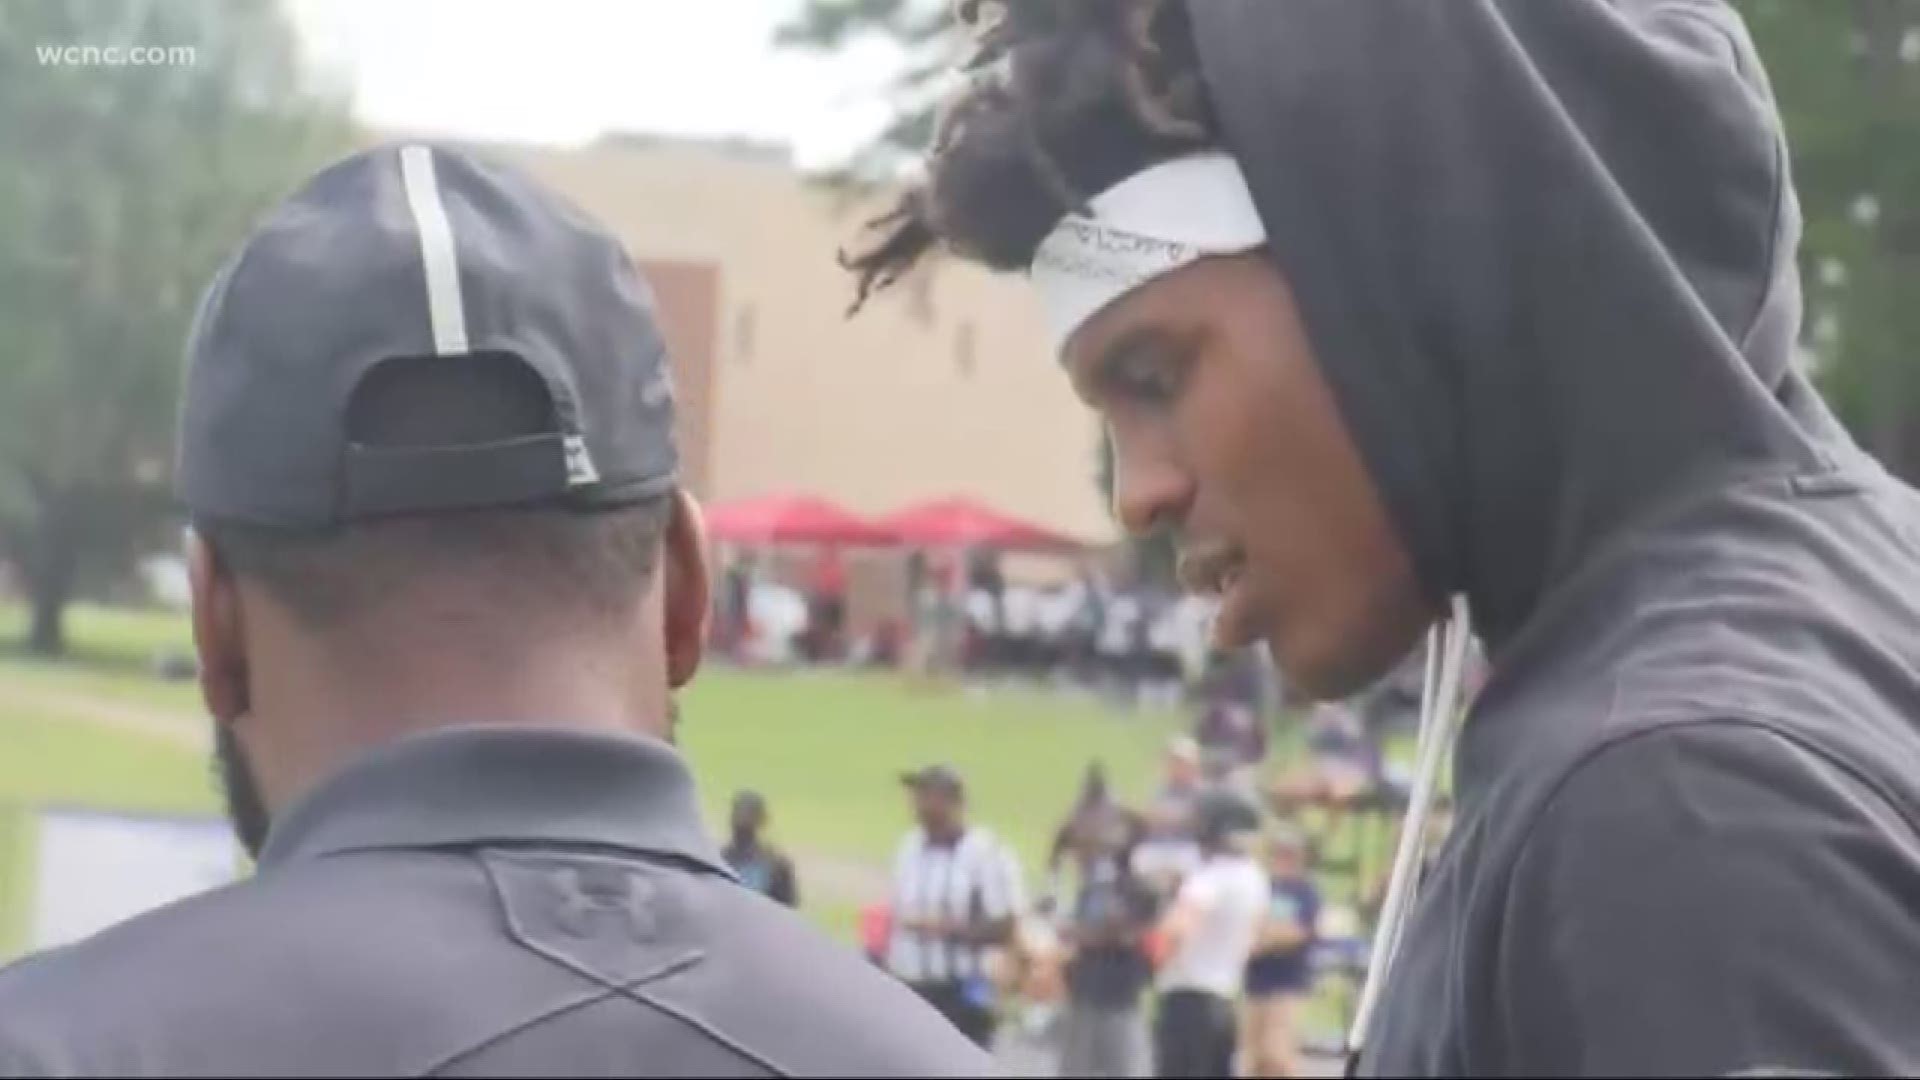 24 high schools competed to be the top football team at Cam Newton's annual 7 on 7 tournament.